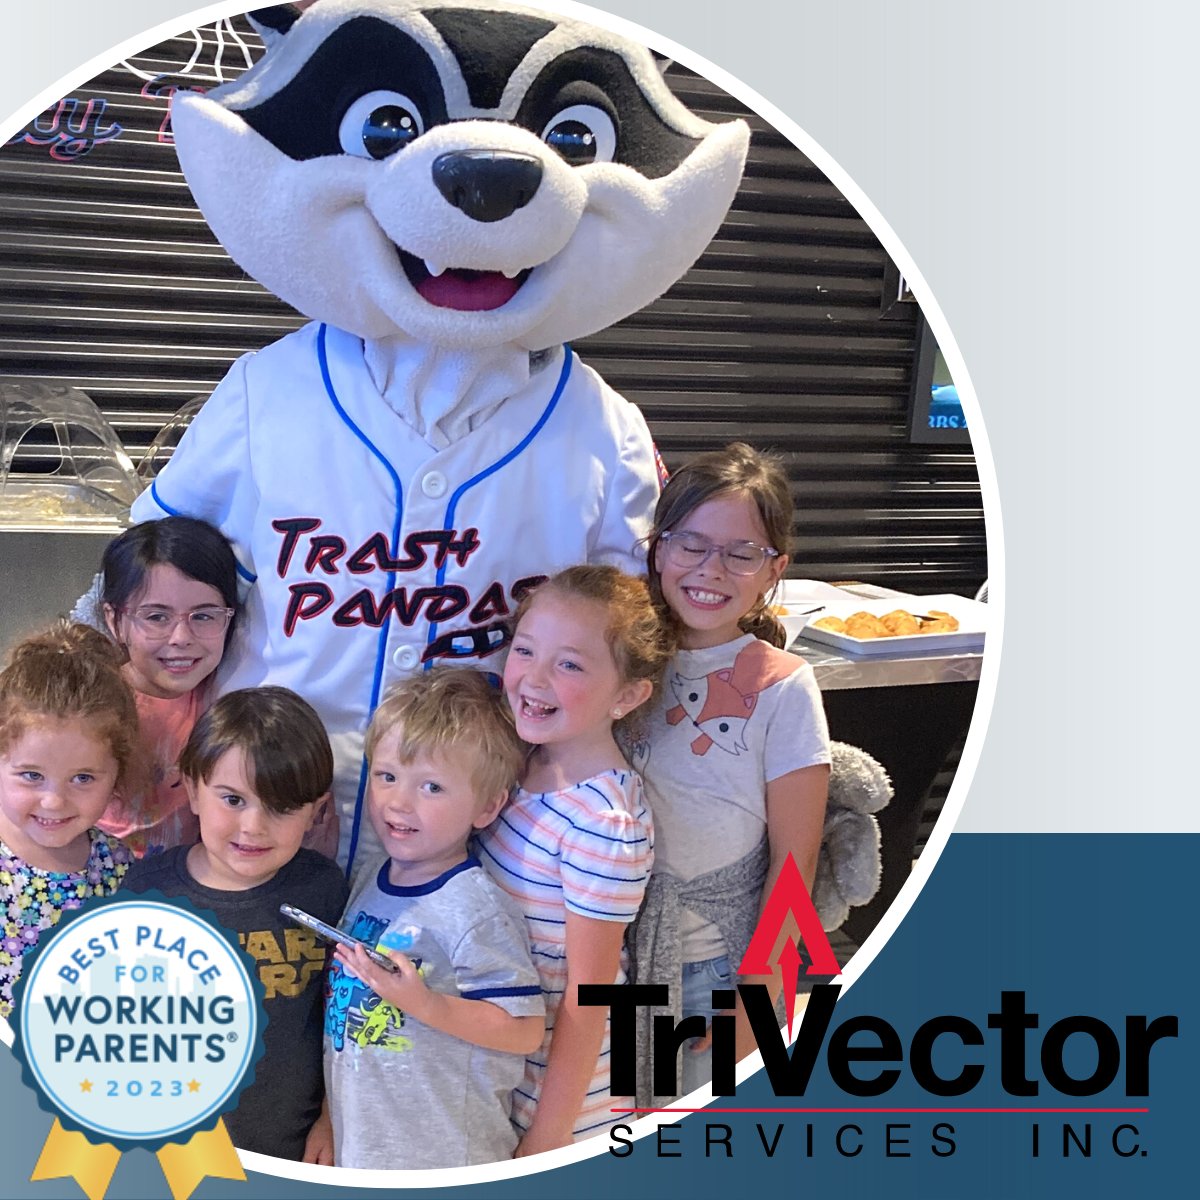 We are incredibly honored be recognized as one of Huntsville’s #BestPlace4WorkingParents® in 2023! Family is one of our core values and we’re proud to offer family-friendly initiatives so our employees can focus on what’s important outside of work. #TriVectorPride